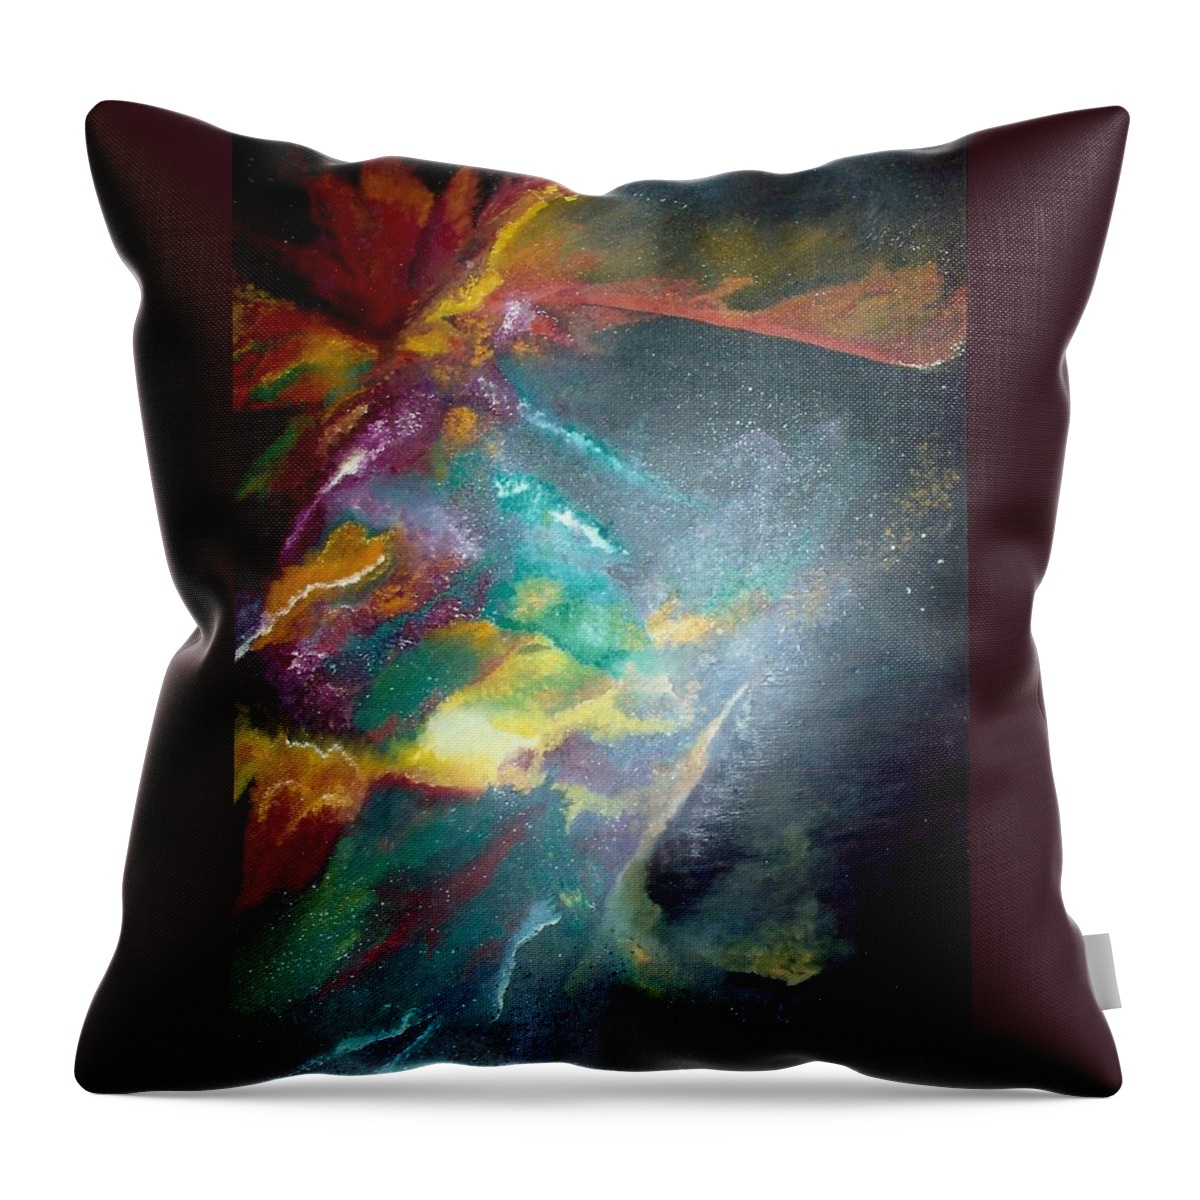 Star Nebula Throw Pillow featuring the painting Star Nebula by Carrie Maurer